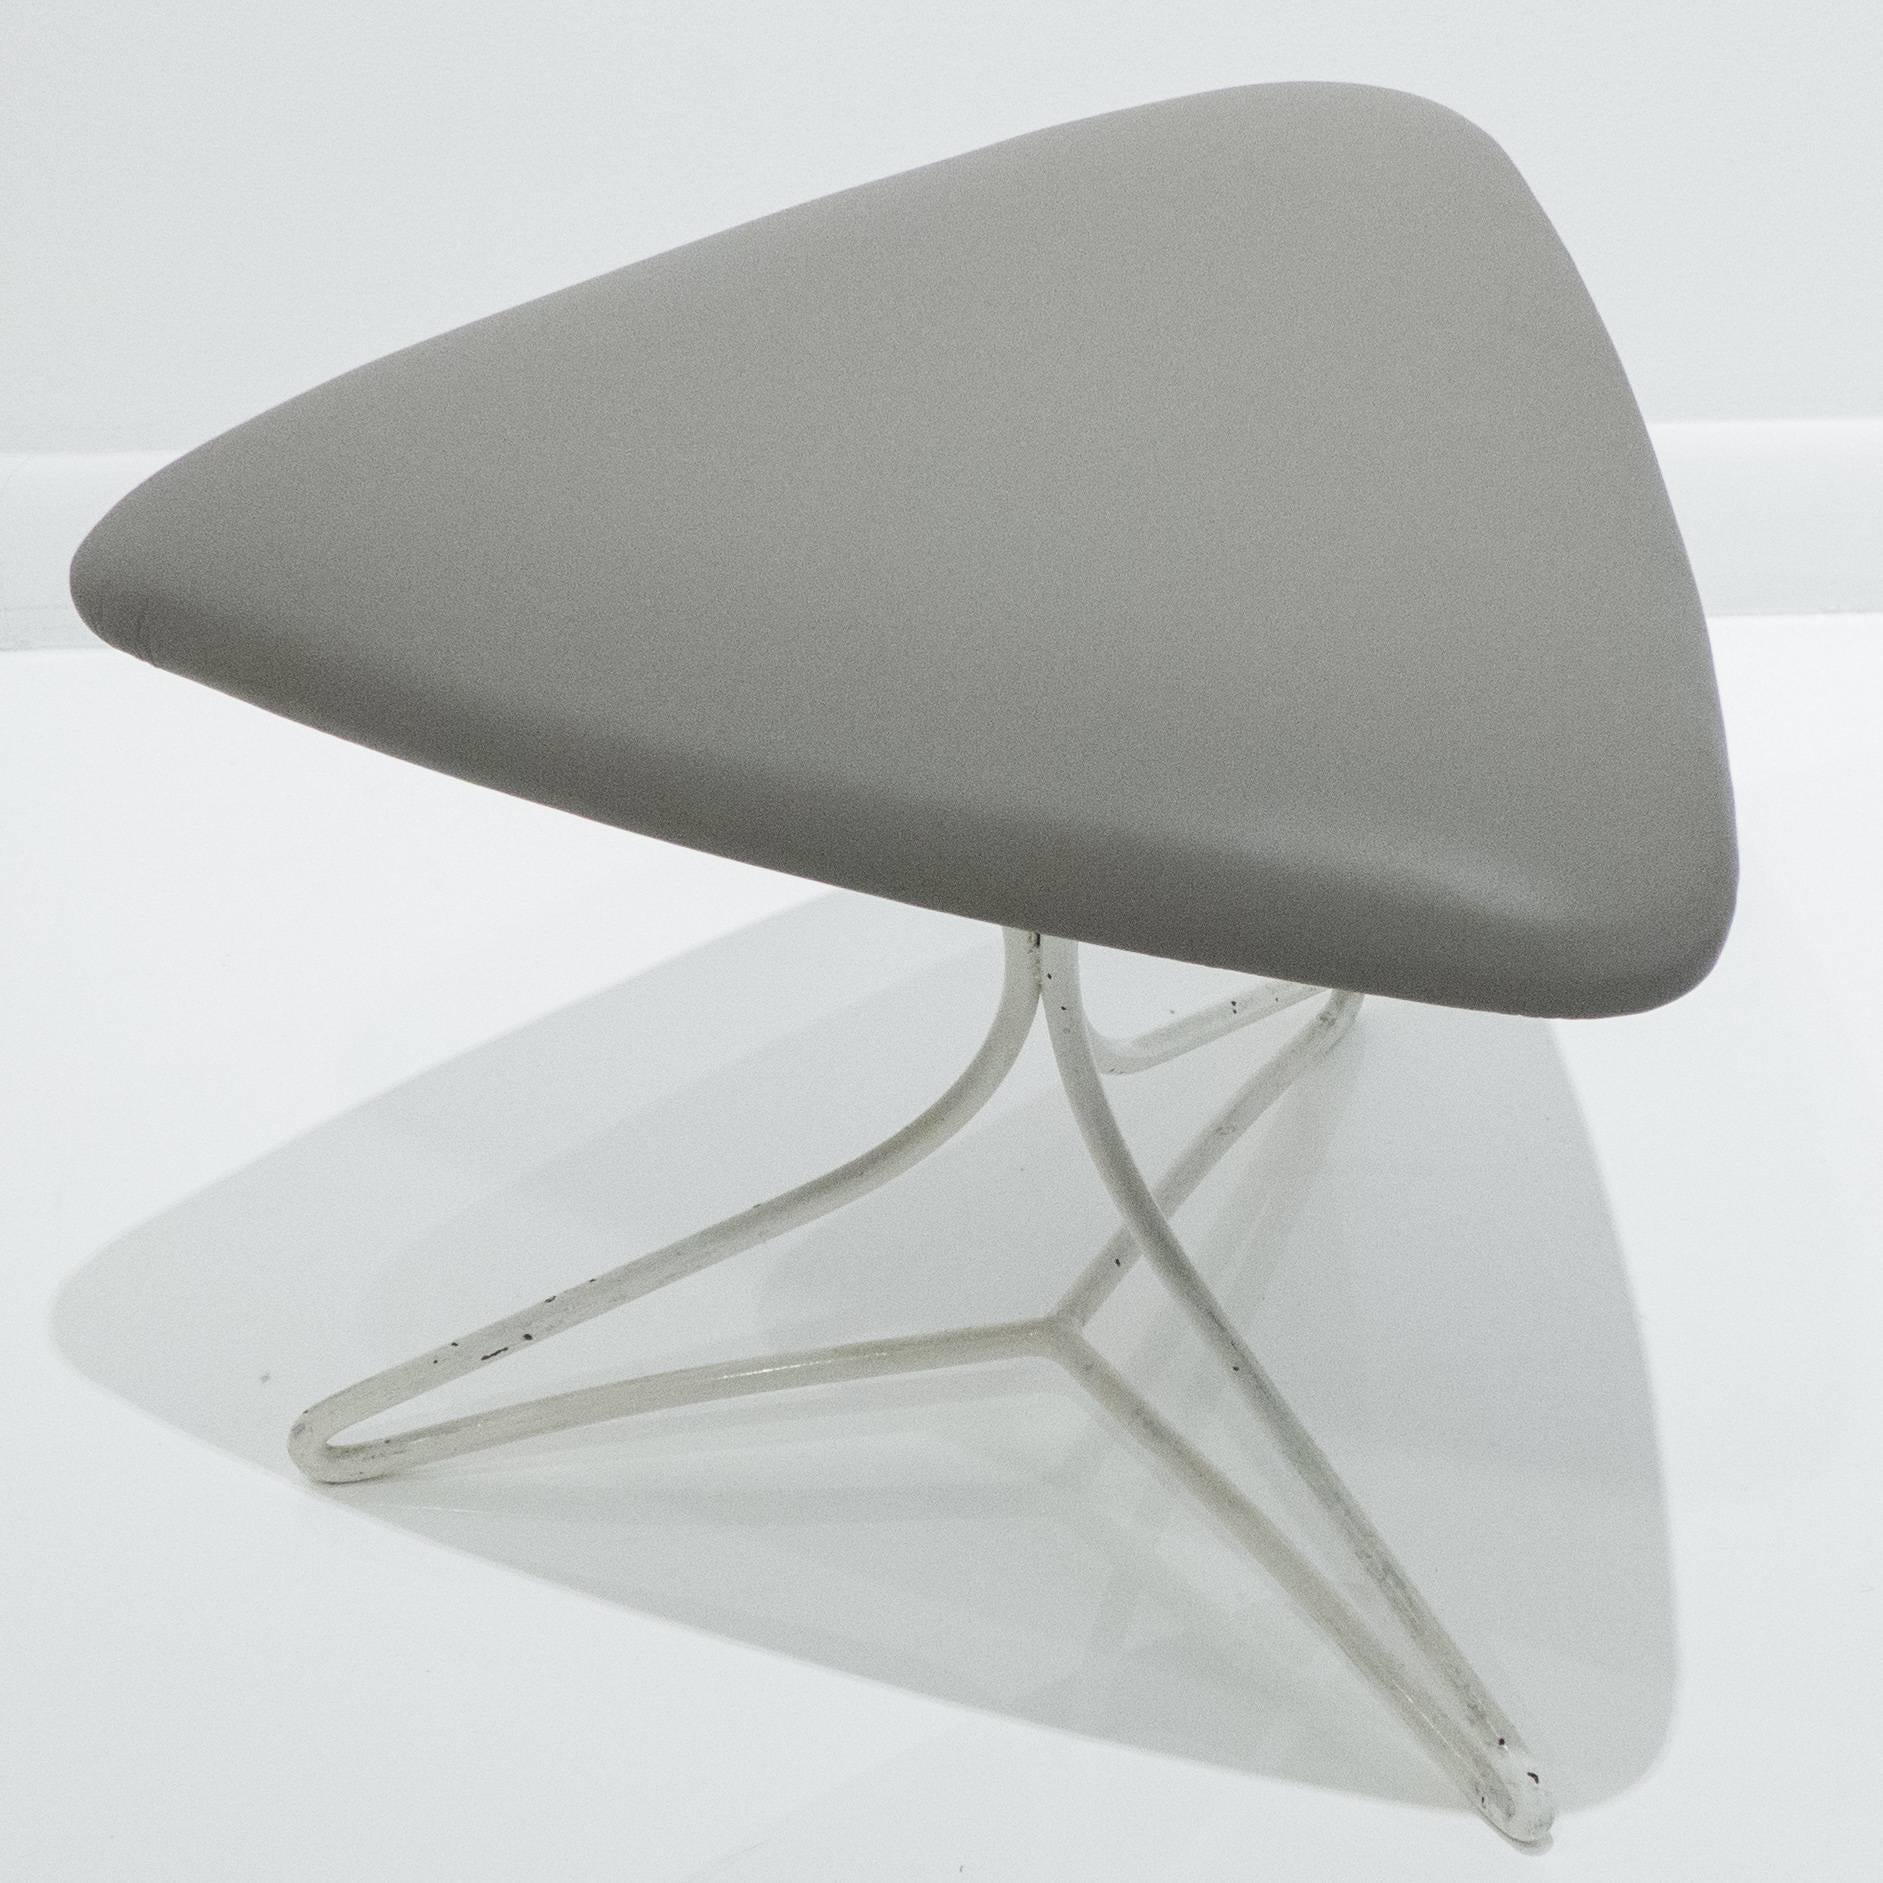 Triangular stool on tripod hairpin steel base. Designed by Vladimir Kagan and produced by Kagan Designs Inc., circa 1970s. The steel base has vintage white enamel paint; the top is newly upholstered in gray leather.